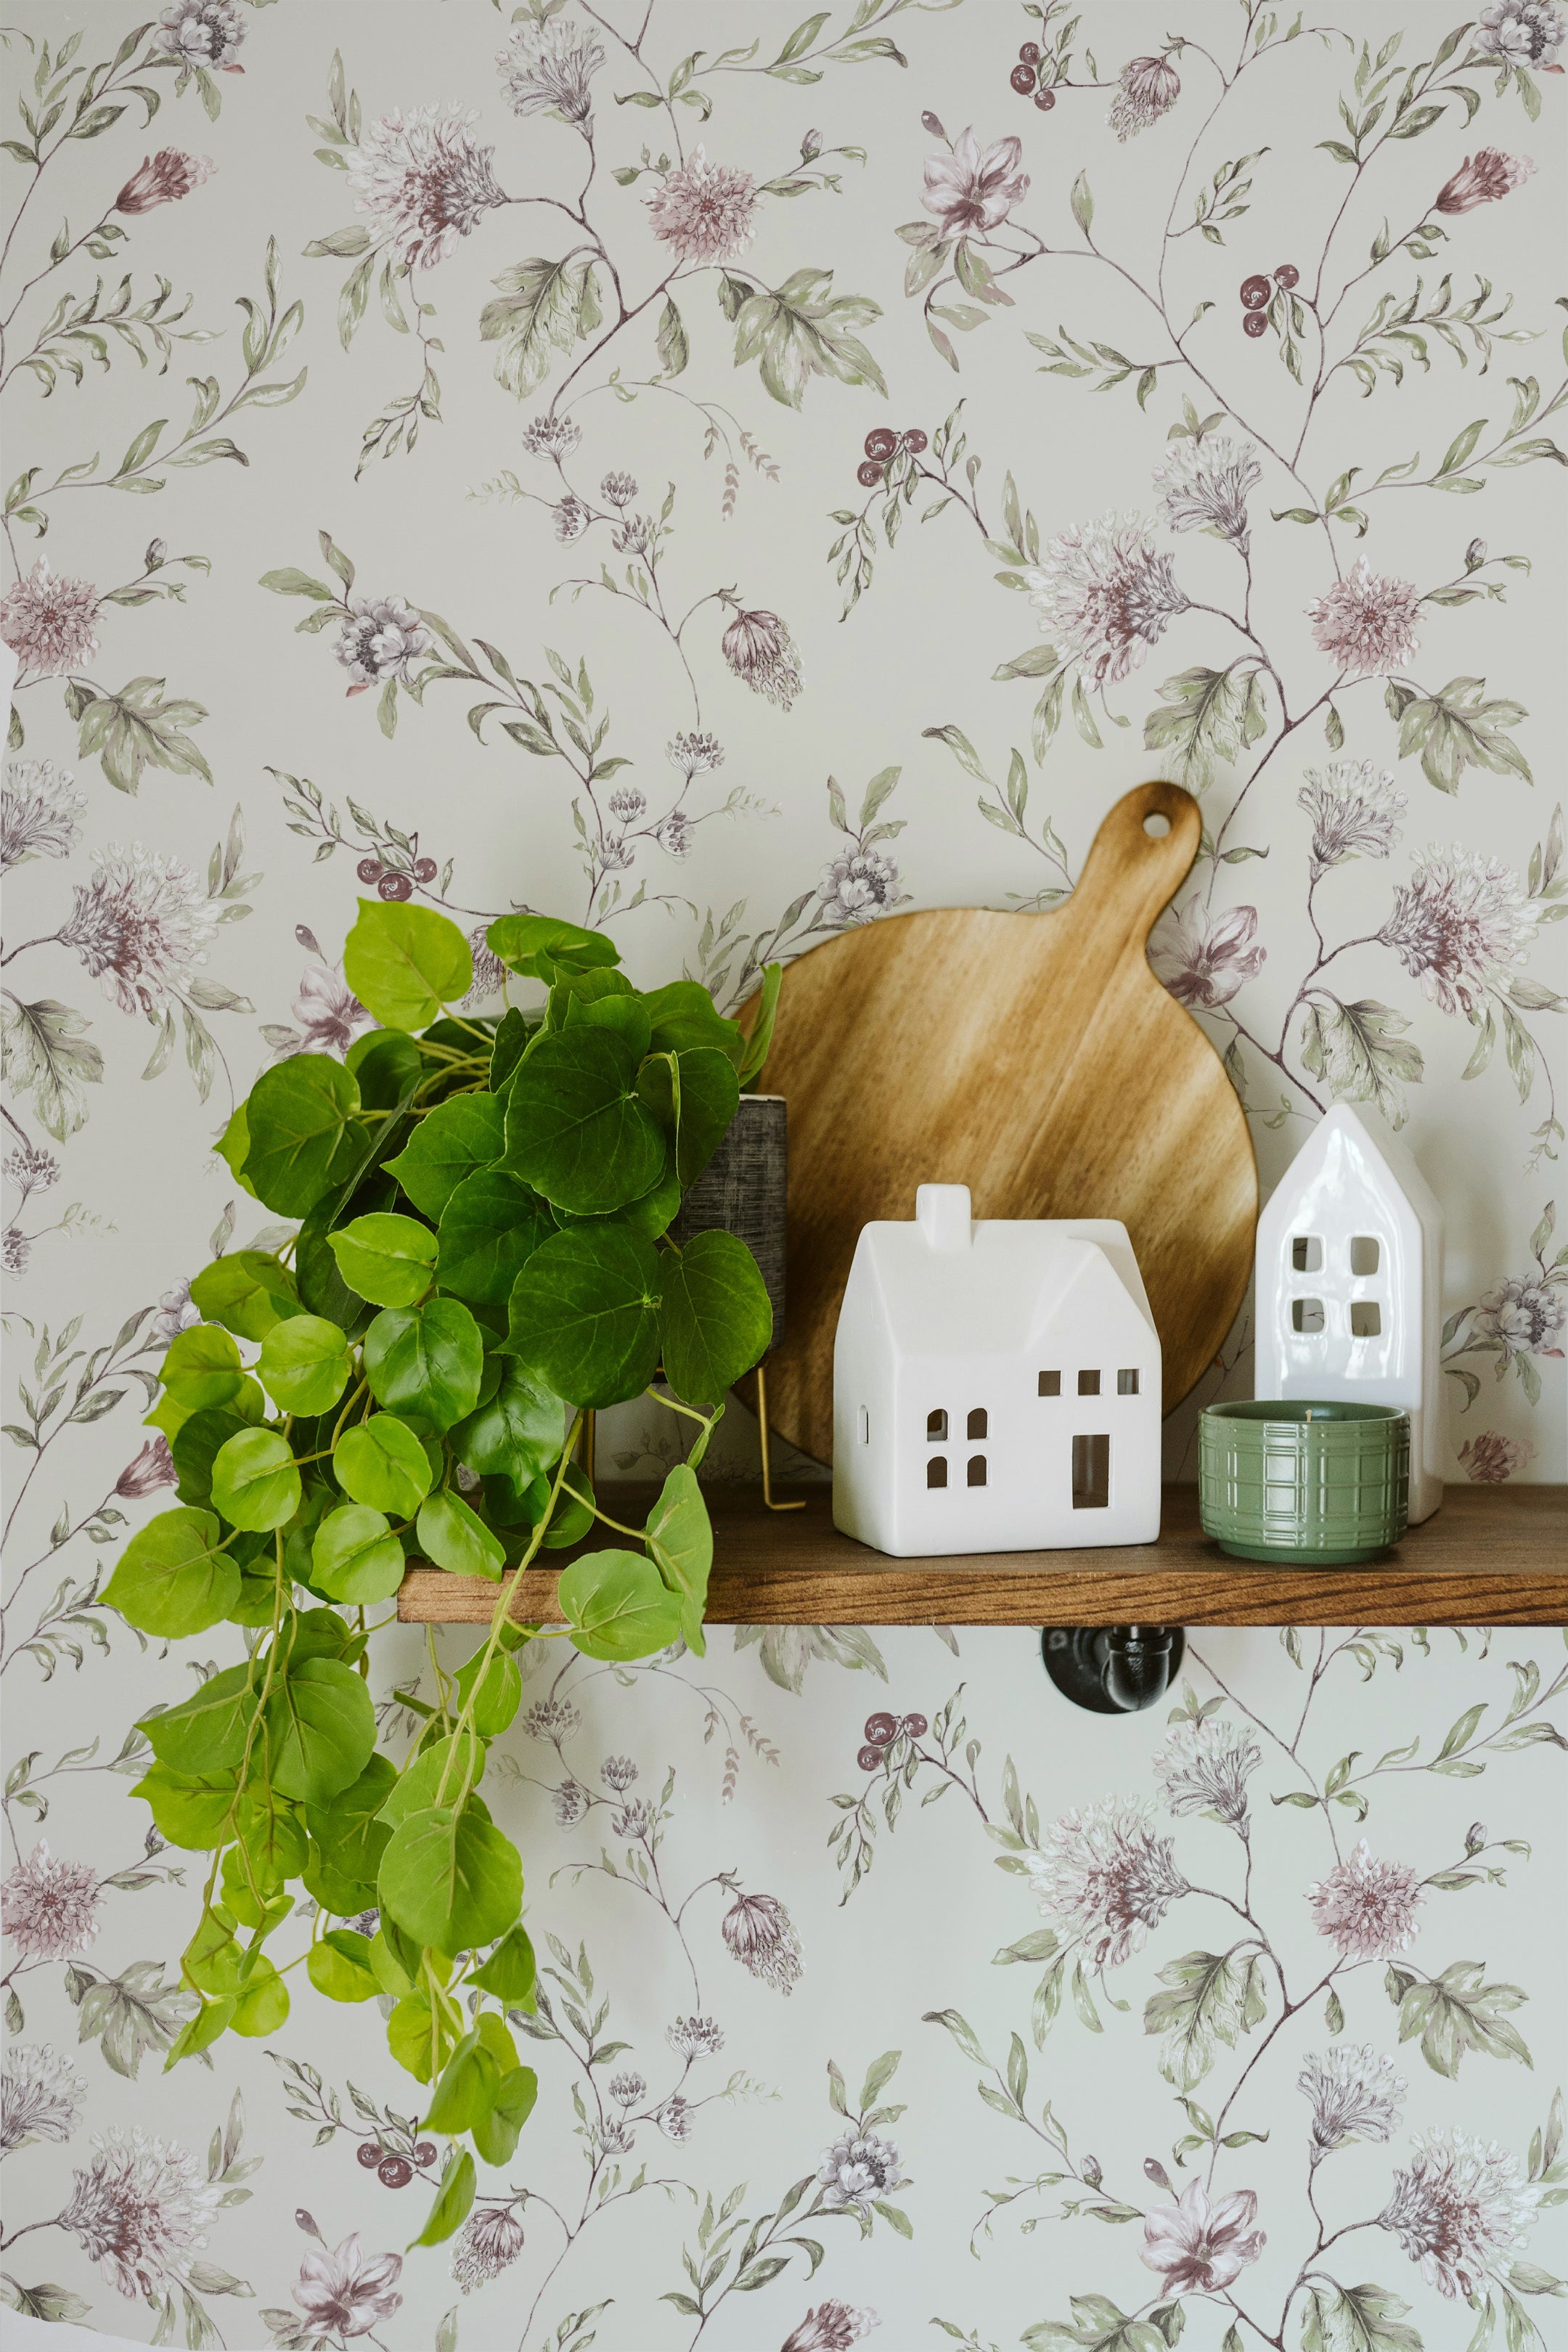 Elegant floral wallpaper with intricate botanical prints of flowers and leaves in muted shades of green and pink, beautifully complemented by home decor items like wooden cutting boards, ceramic houses, and a lush green plant on a rustic wooden shelf